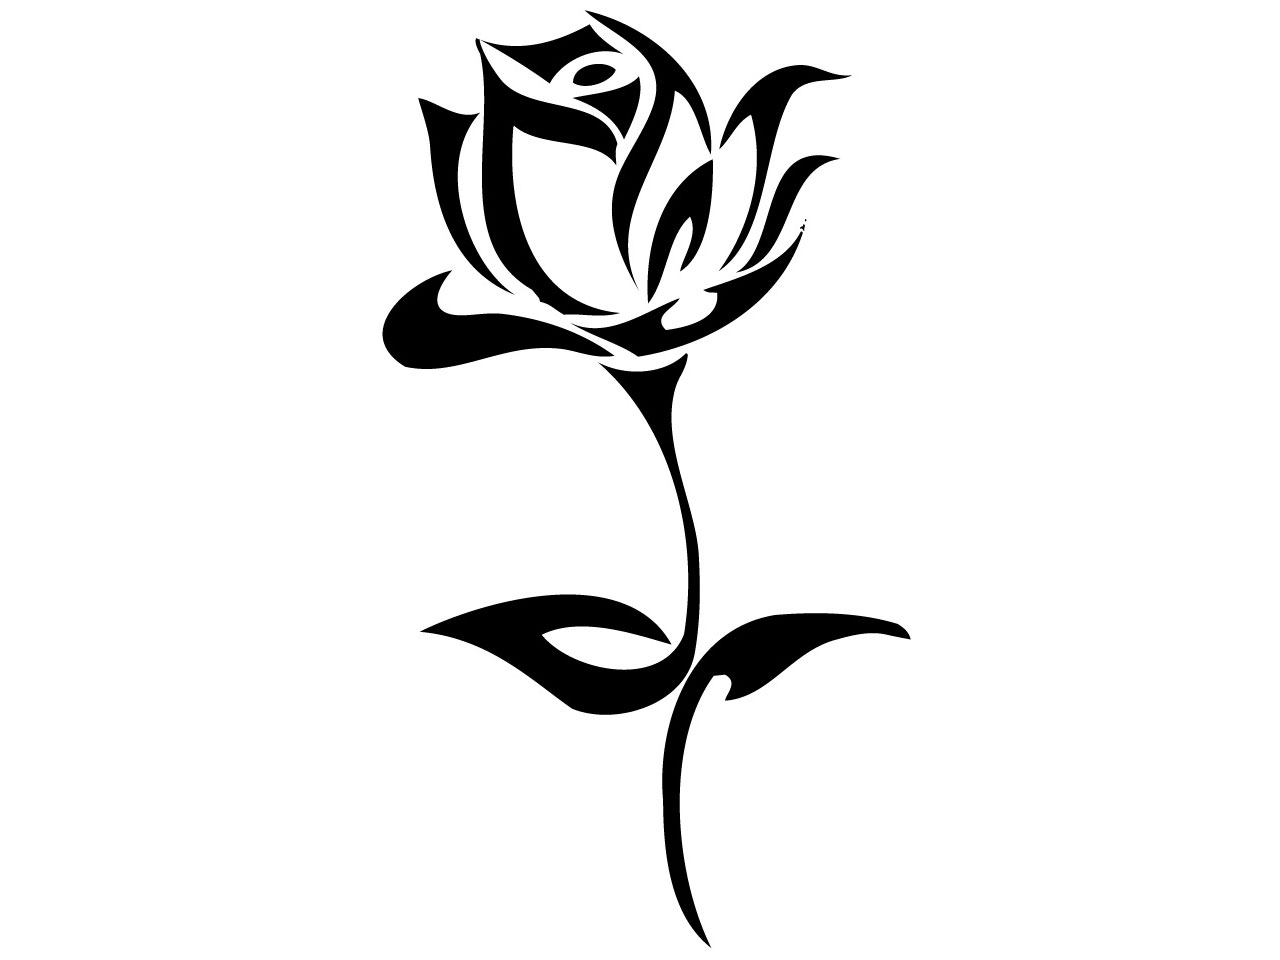 Free Black And White Rose Drawing, Download Free Clip Art, Free Clip